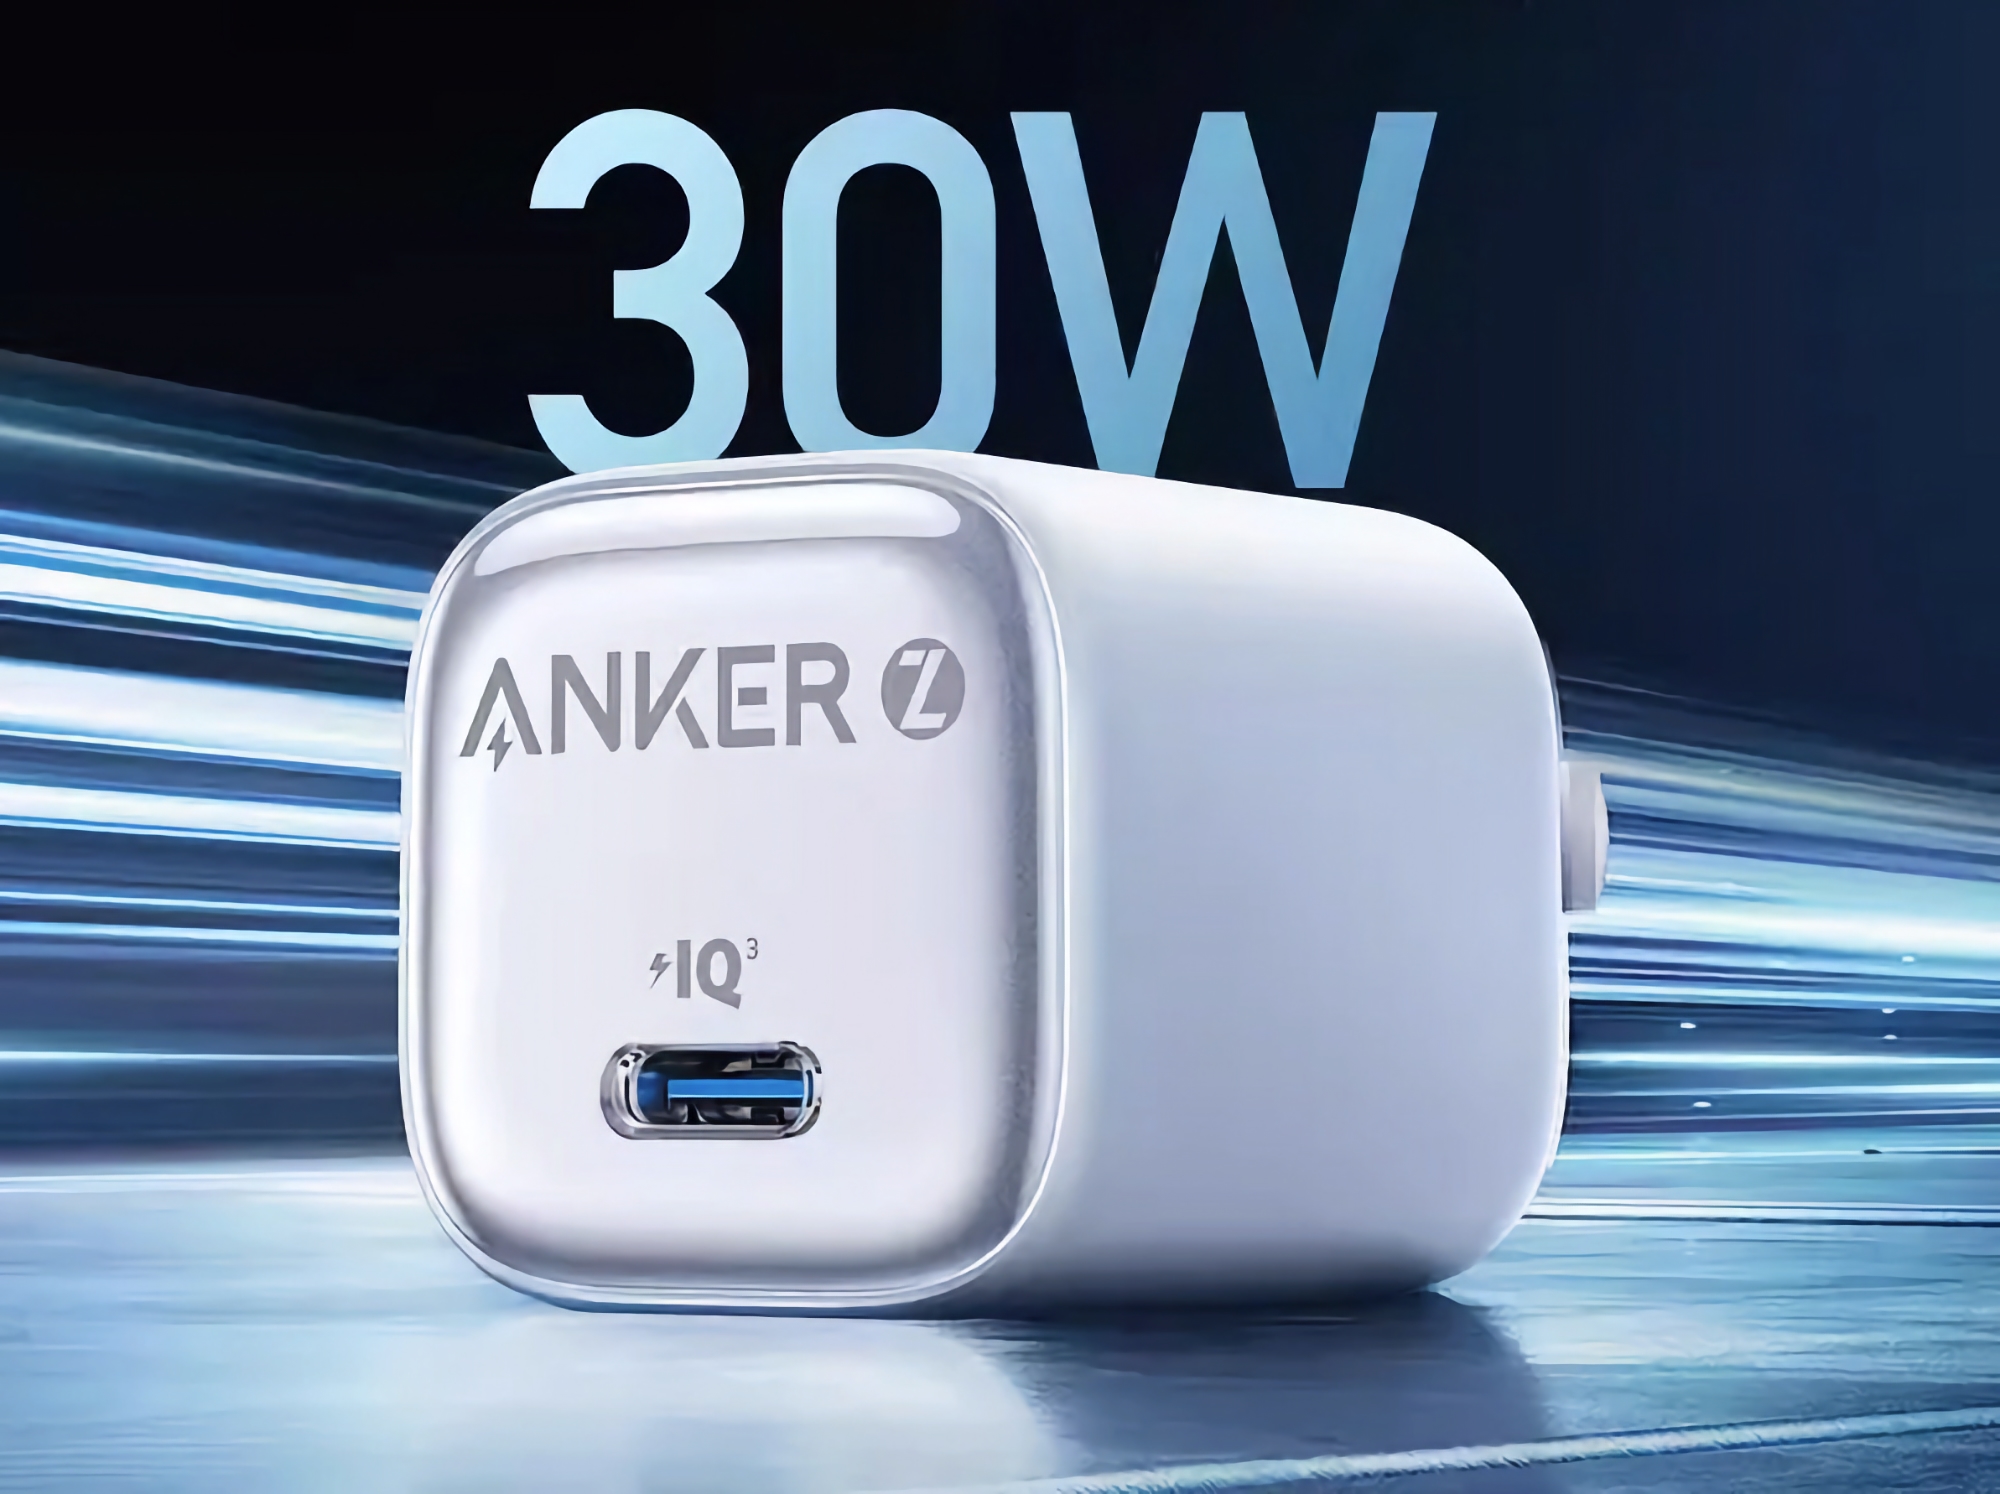 Anker is preparing to release a compact charger with a USB-C port and 30W of power